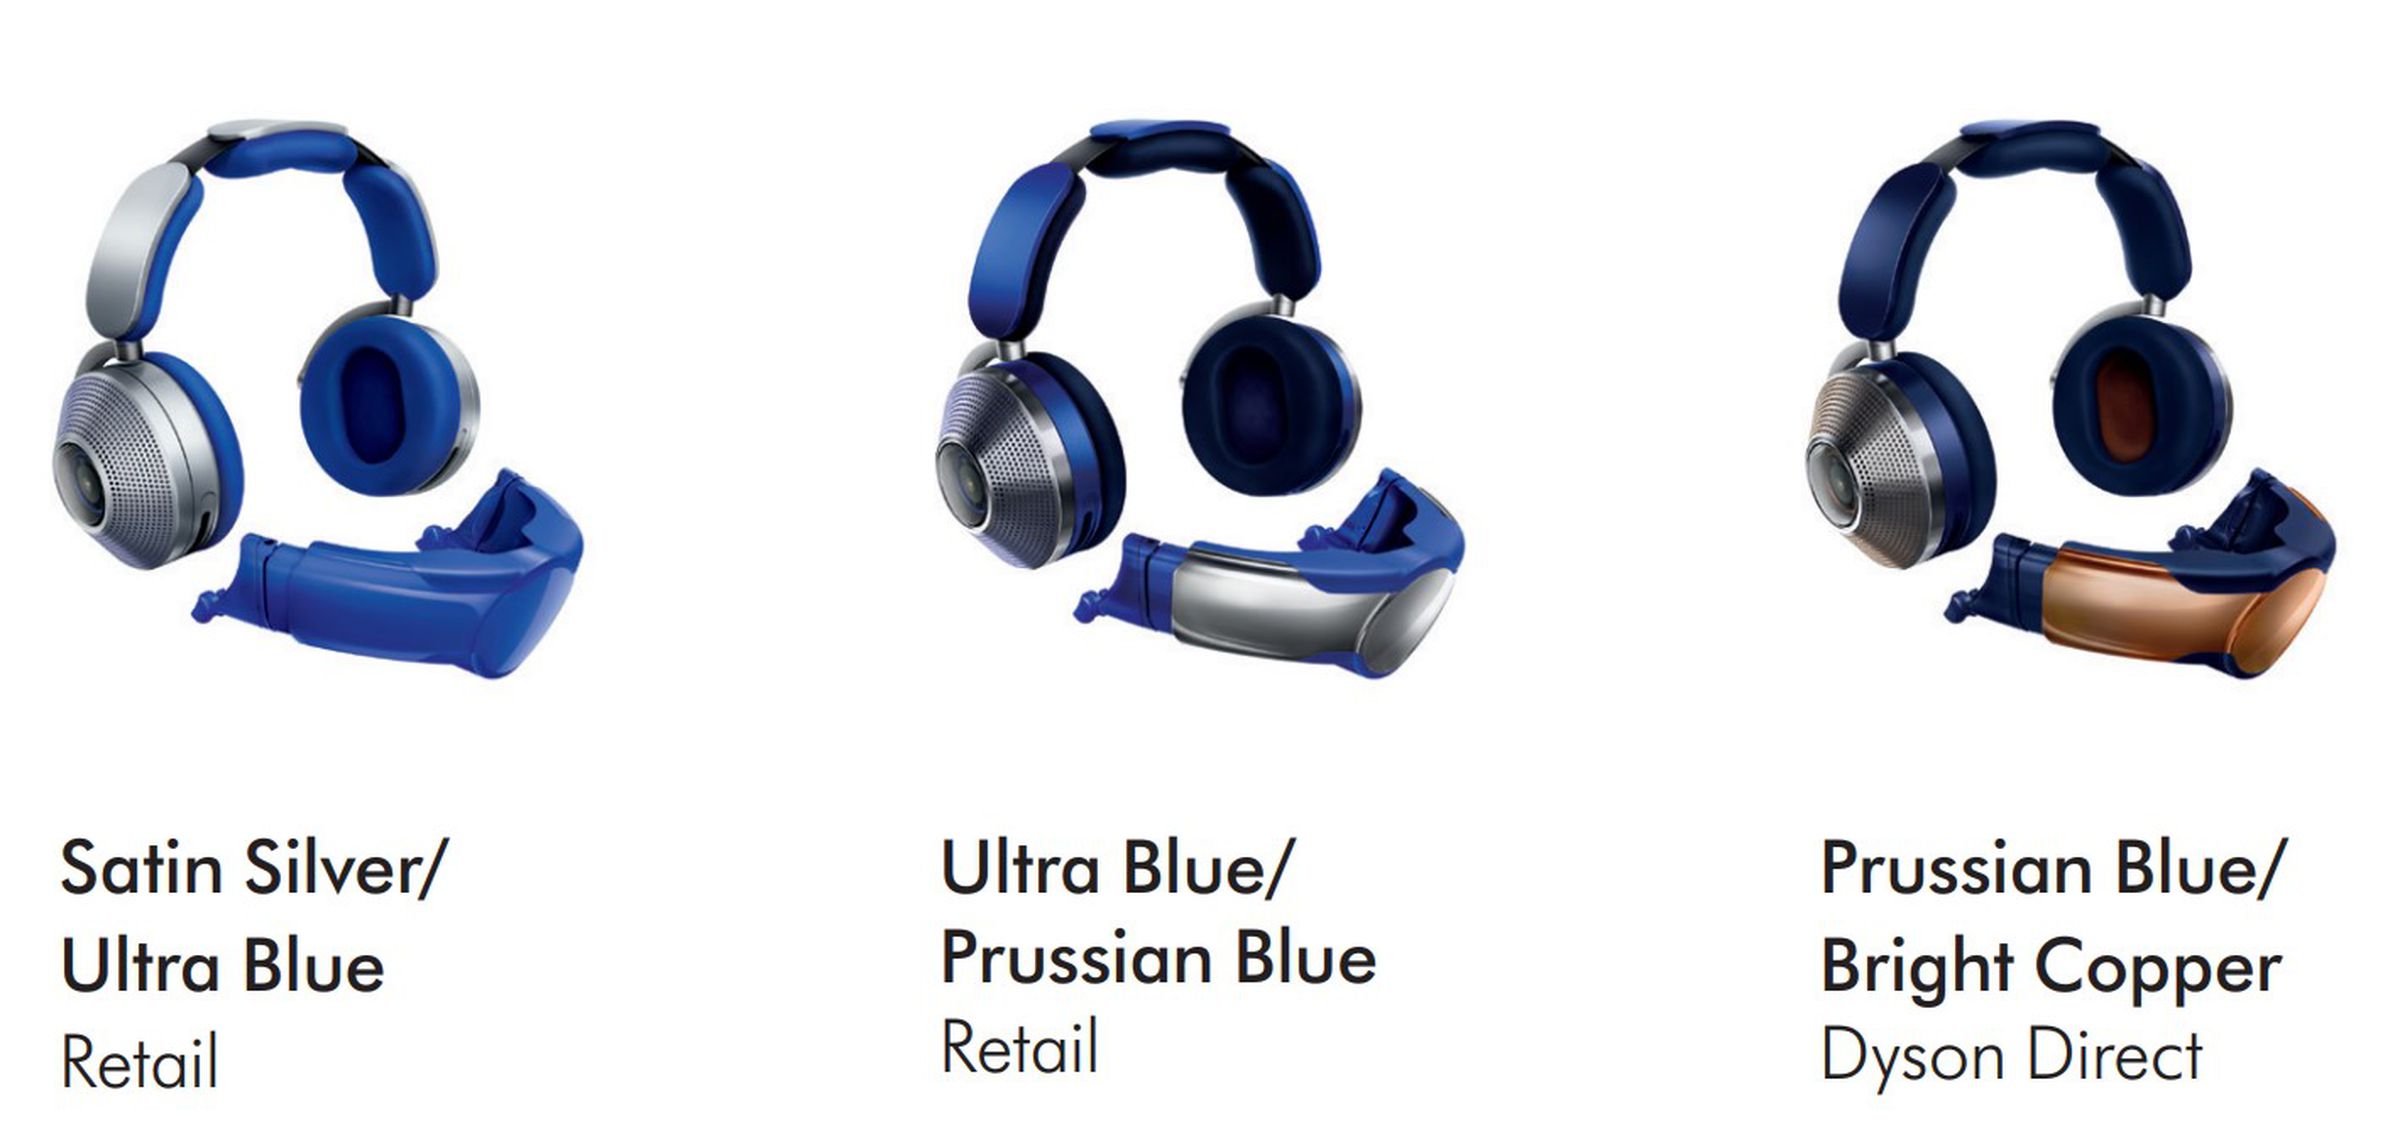 Three versions of the Dyson Zone headphones in different blue/metallic shades.